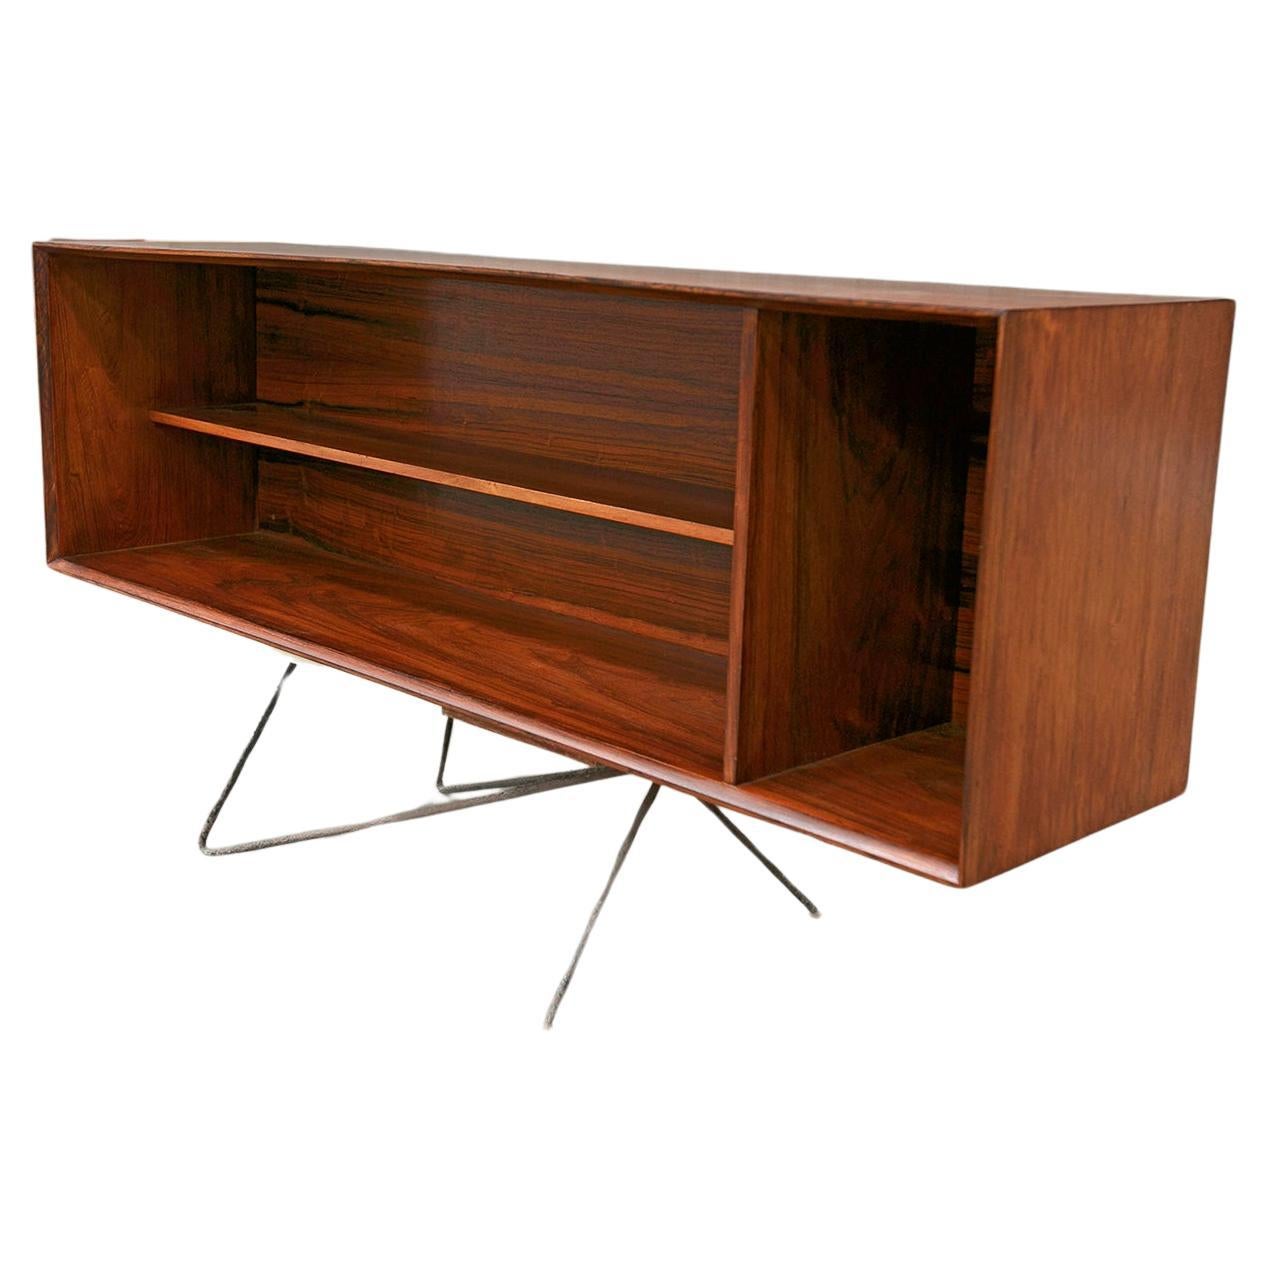 Floating Wall Sideboard in Hardwood by Carlo Hauner for Forma, c. 1950 Brazil For Sale